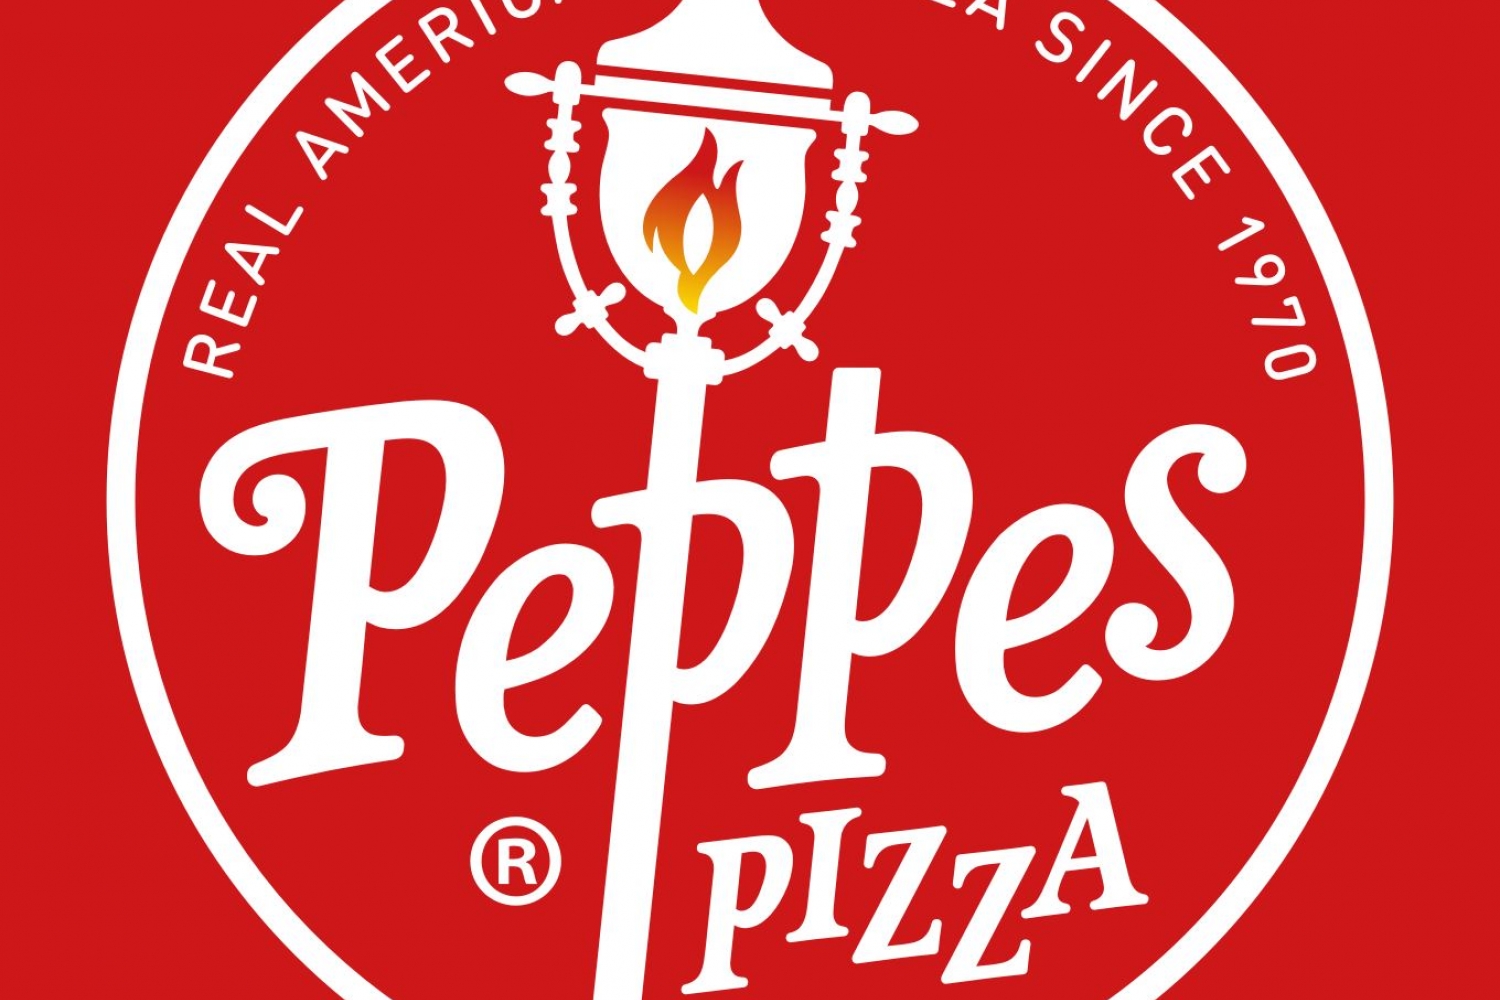 Peppes Pizza - Real American pizza since 1970!